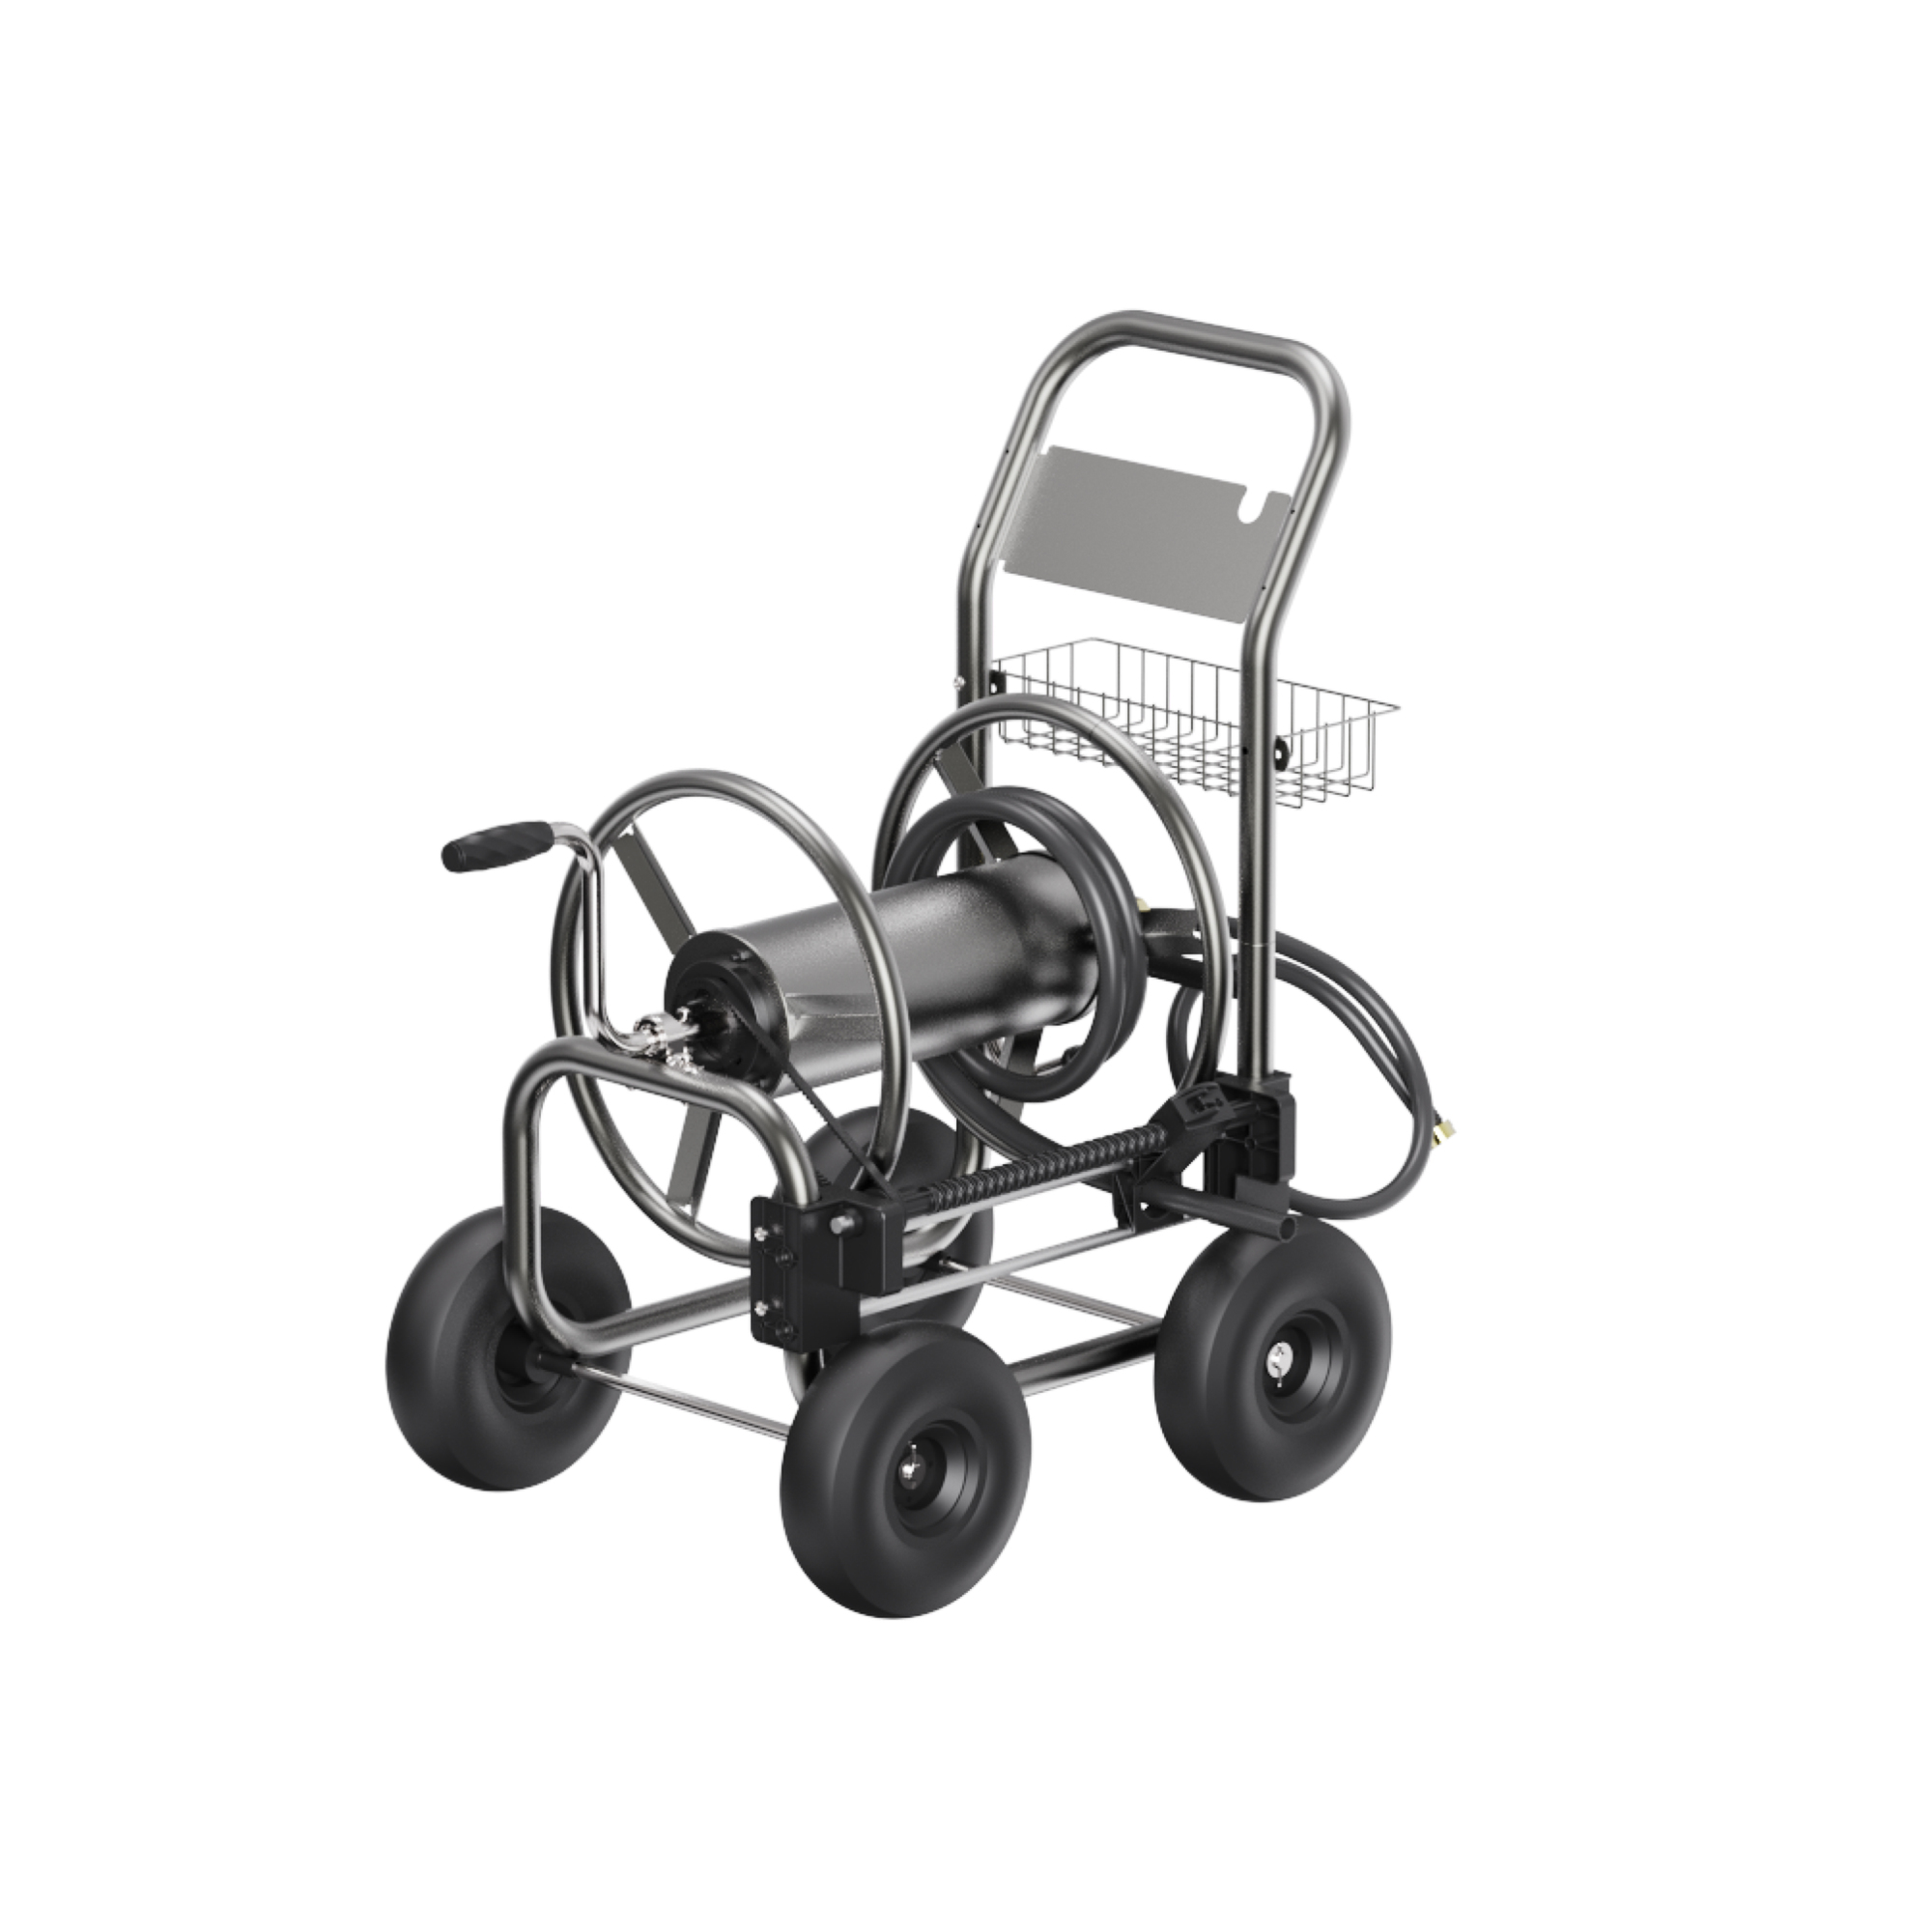 Giraffe Tools, Heavy Duty Hose Reel Cart with Wheels, 5/8Inch 250ft., Hose Length Capacity 250 ft, Color Silver, Model HC03BUS